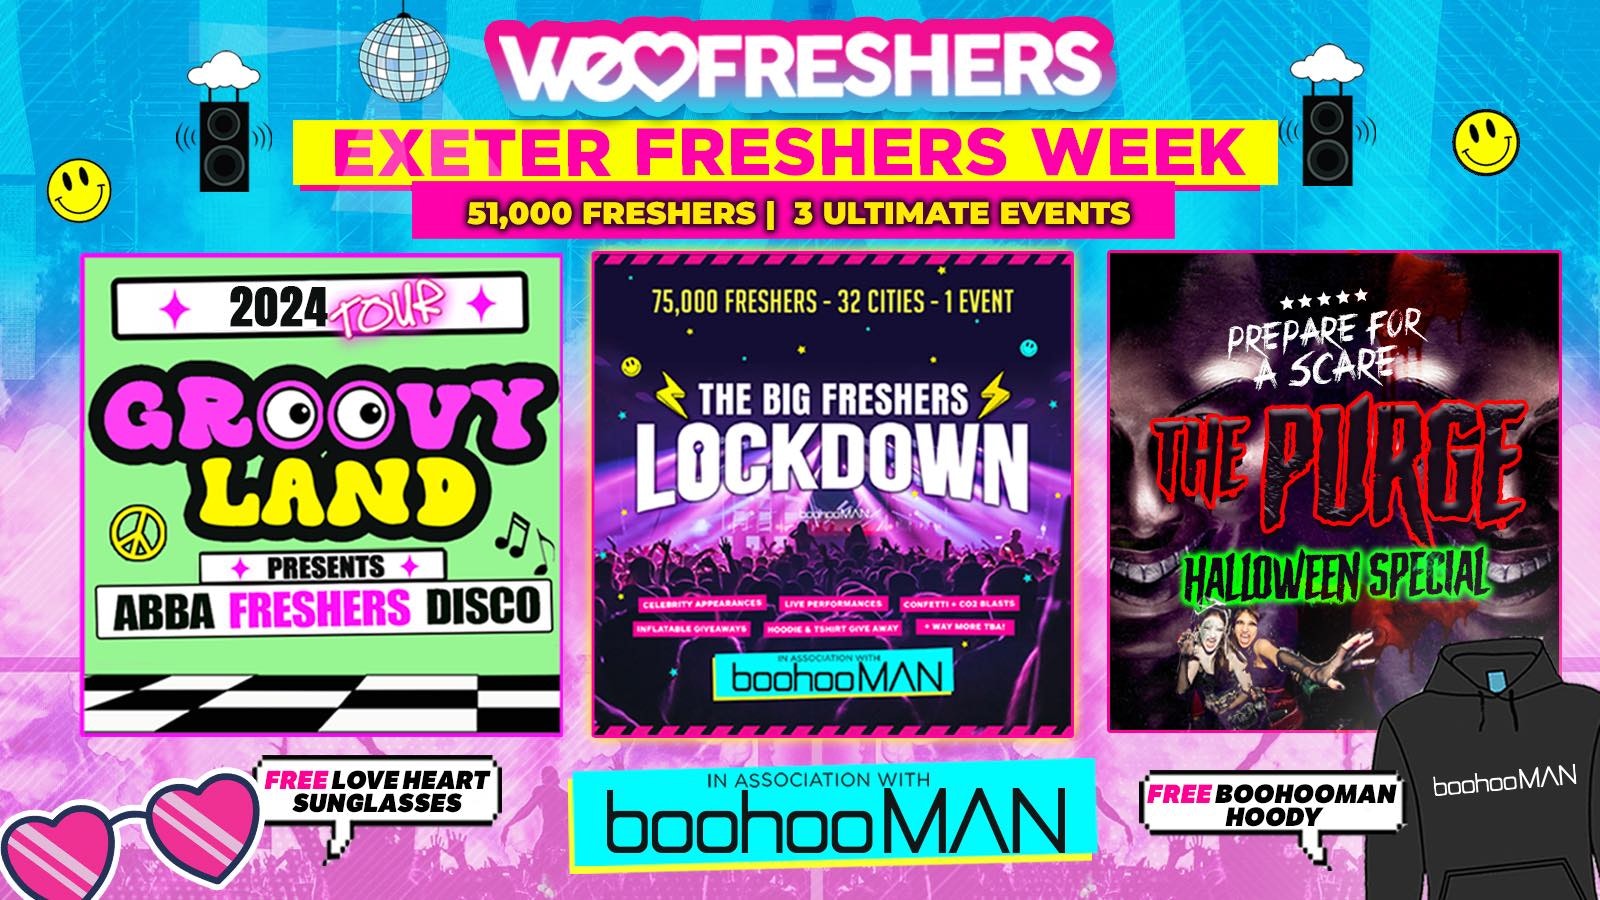 WE LOVE EXETER FRESHERS 2024 in association with boohooMAN ❗3 EVENTS❗